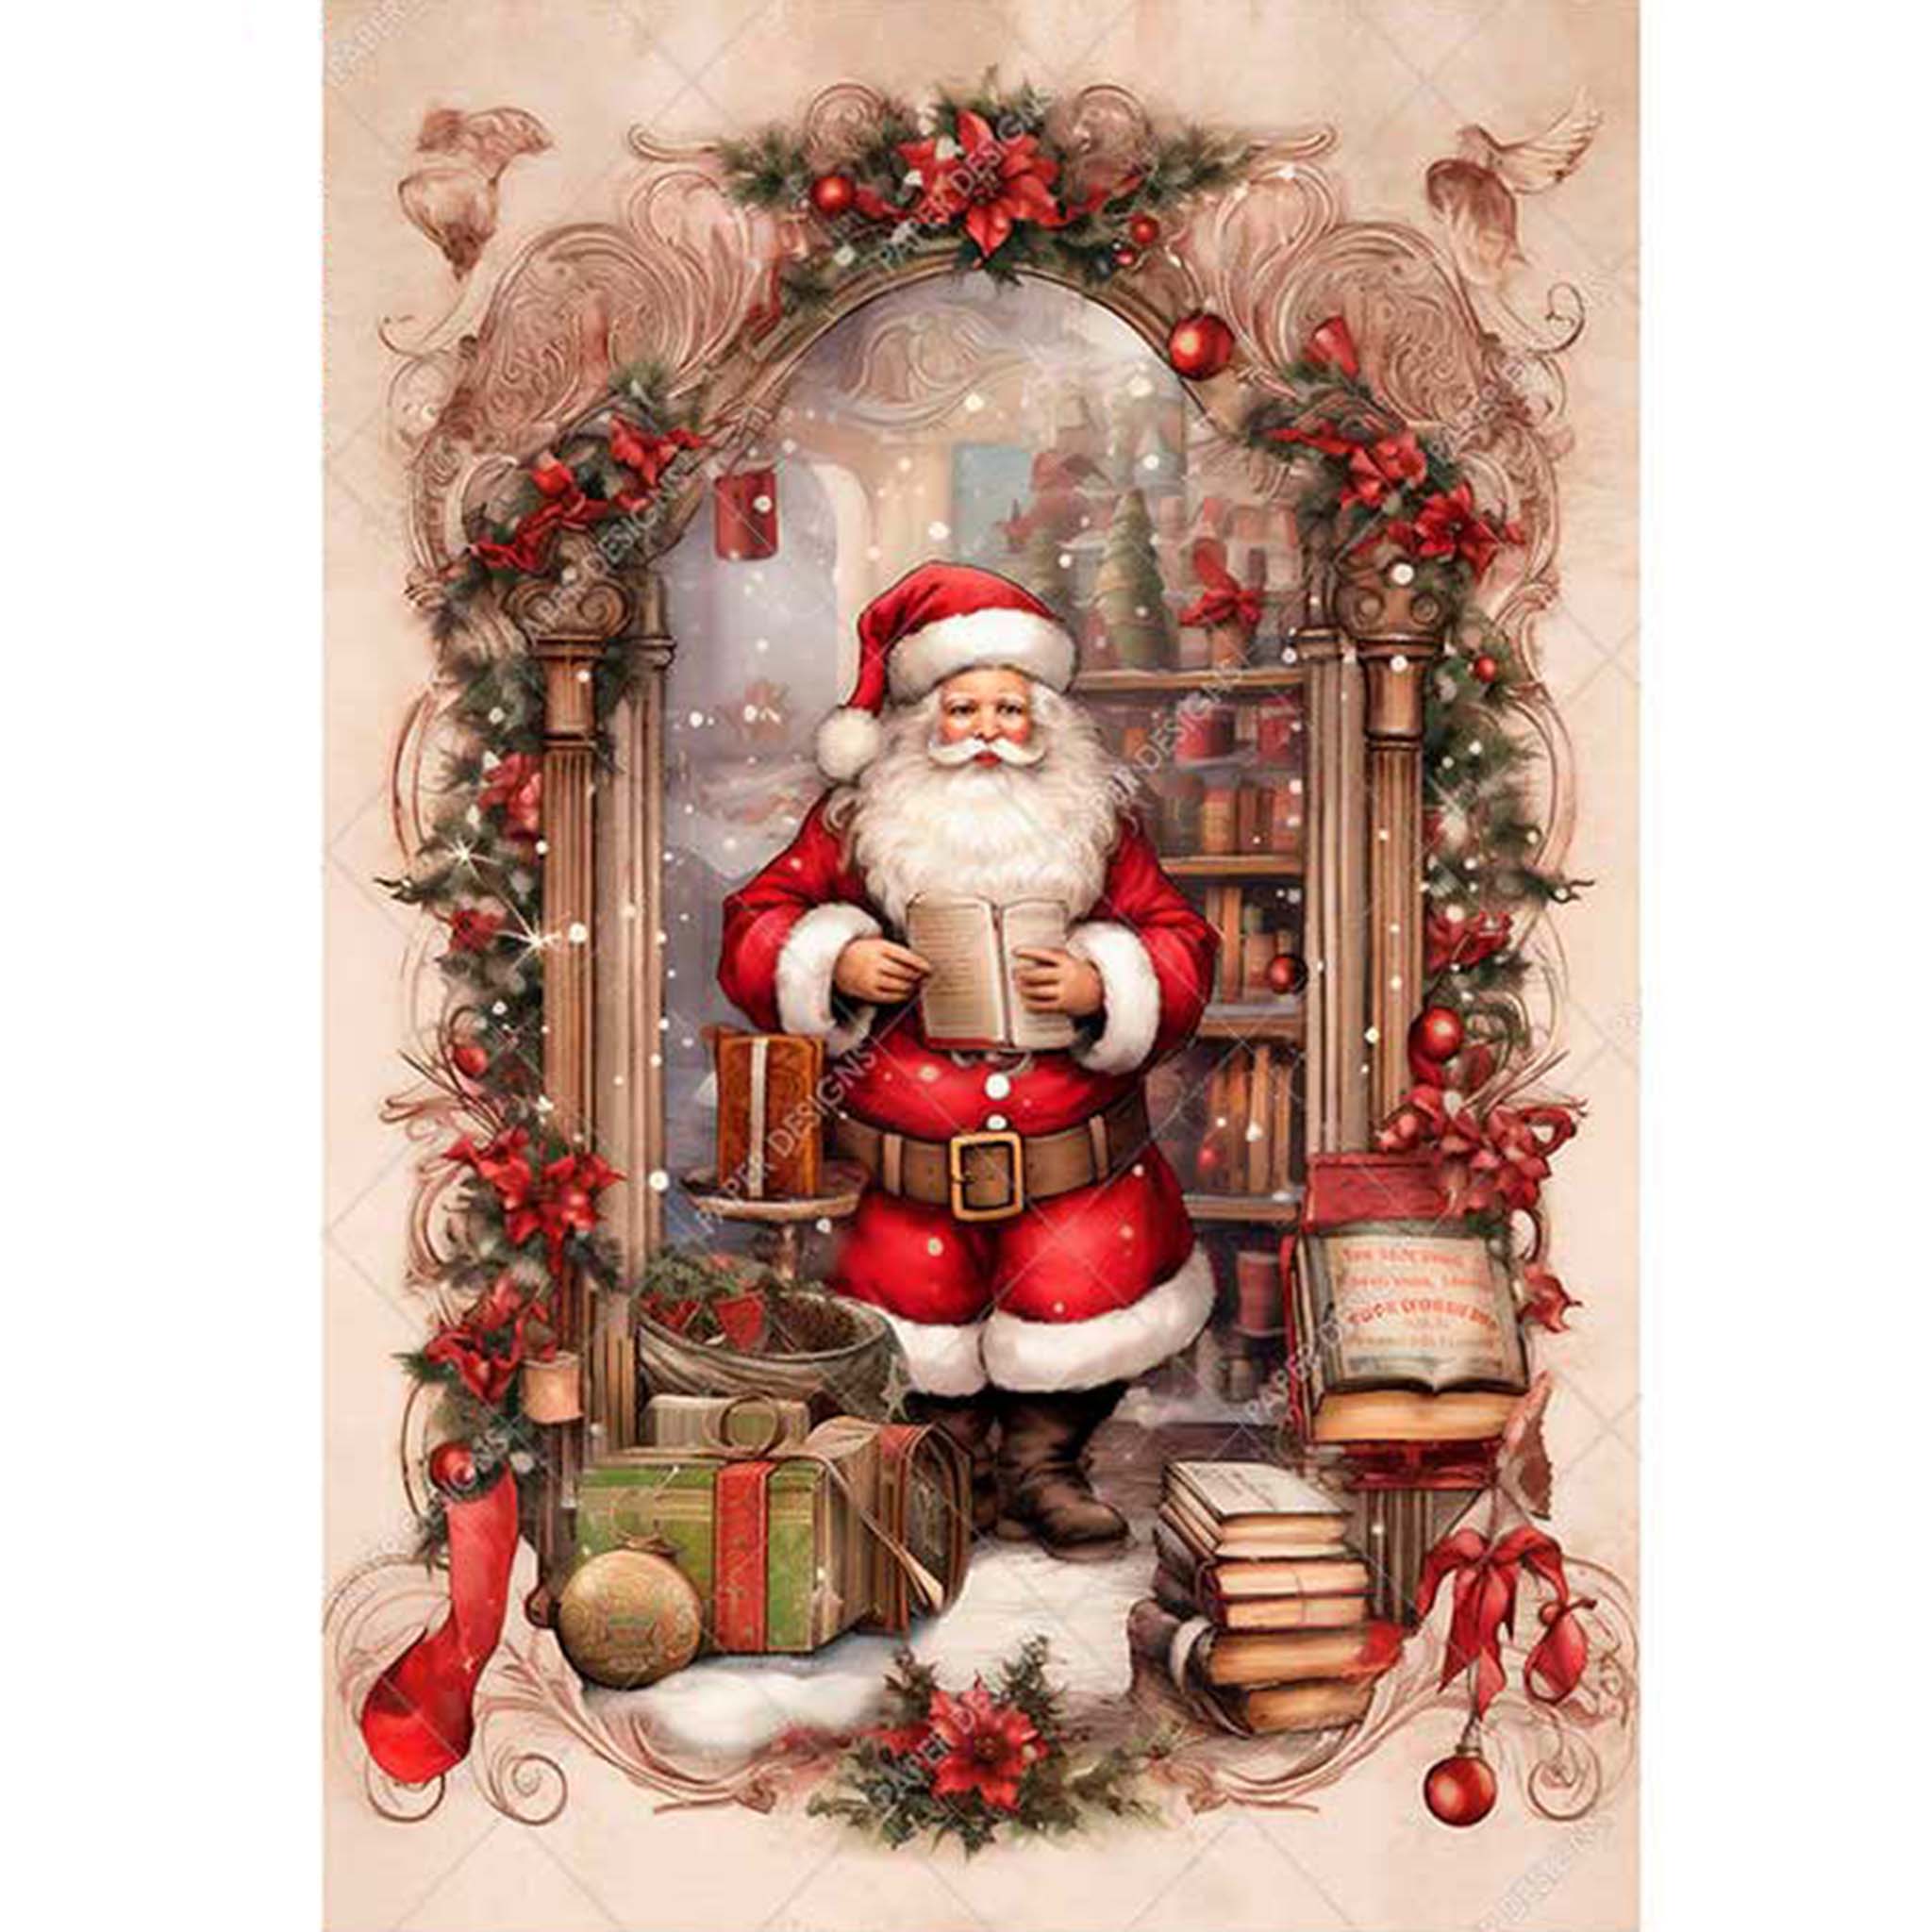 A3 rice paper design that features a whimsical Santa standing in front of a bookshelf, complete with a book in his hands. White borders are on the sides.